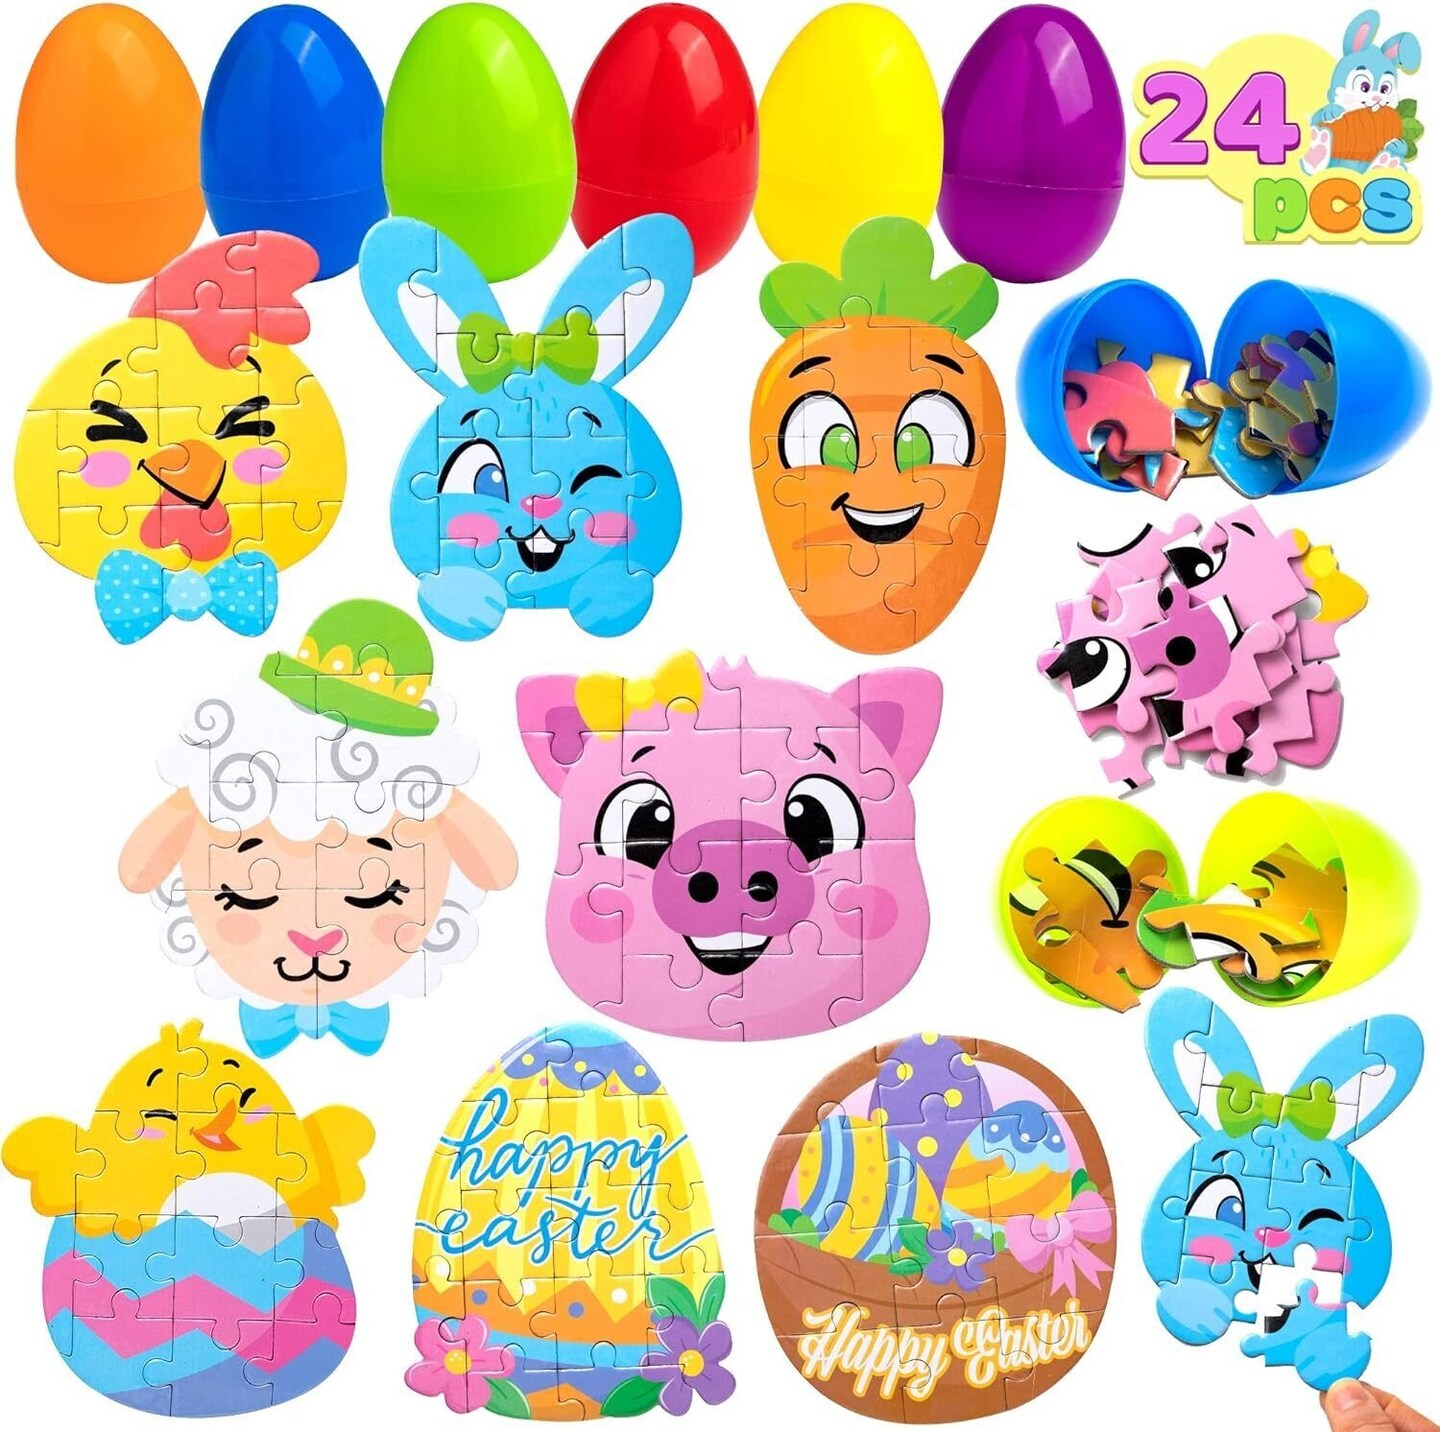 24 PCS Easter Egg Jigsaw Puzzles Easter Eggs with Toys Inside for Easter Party